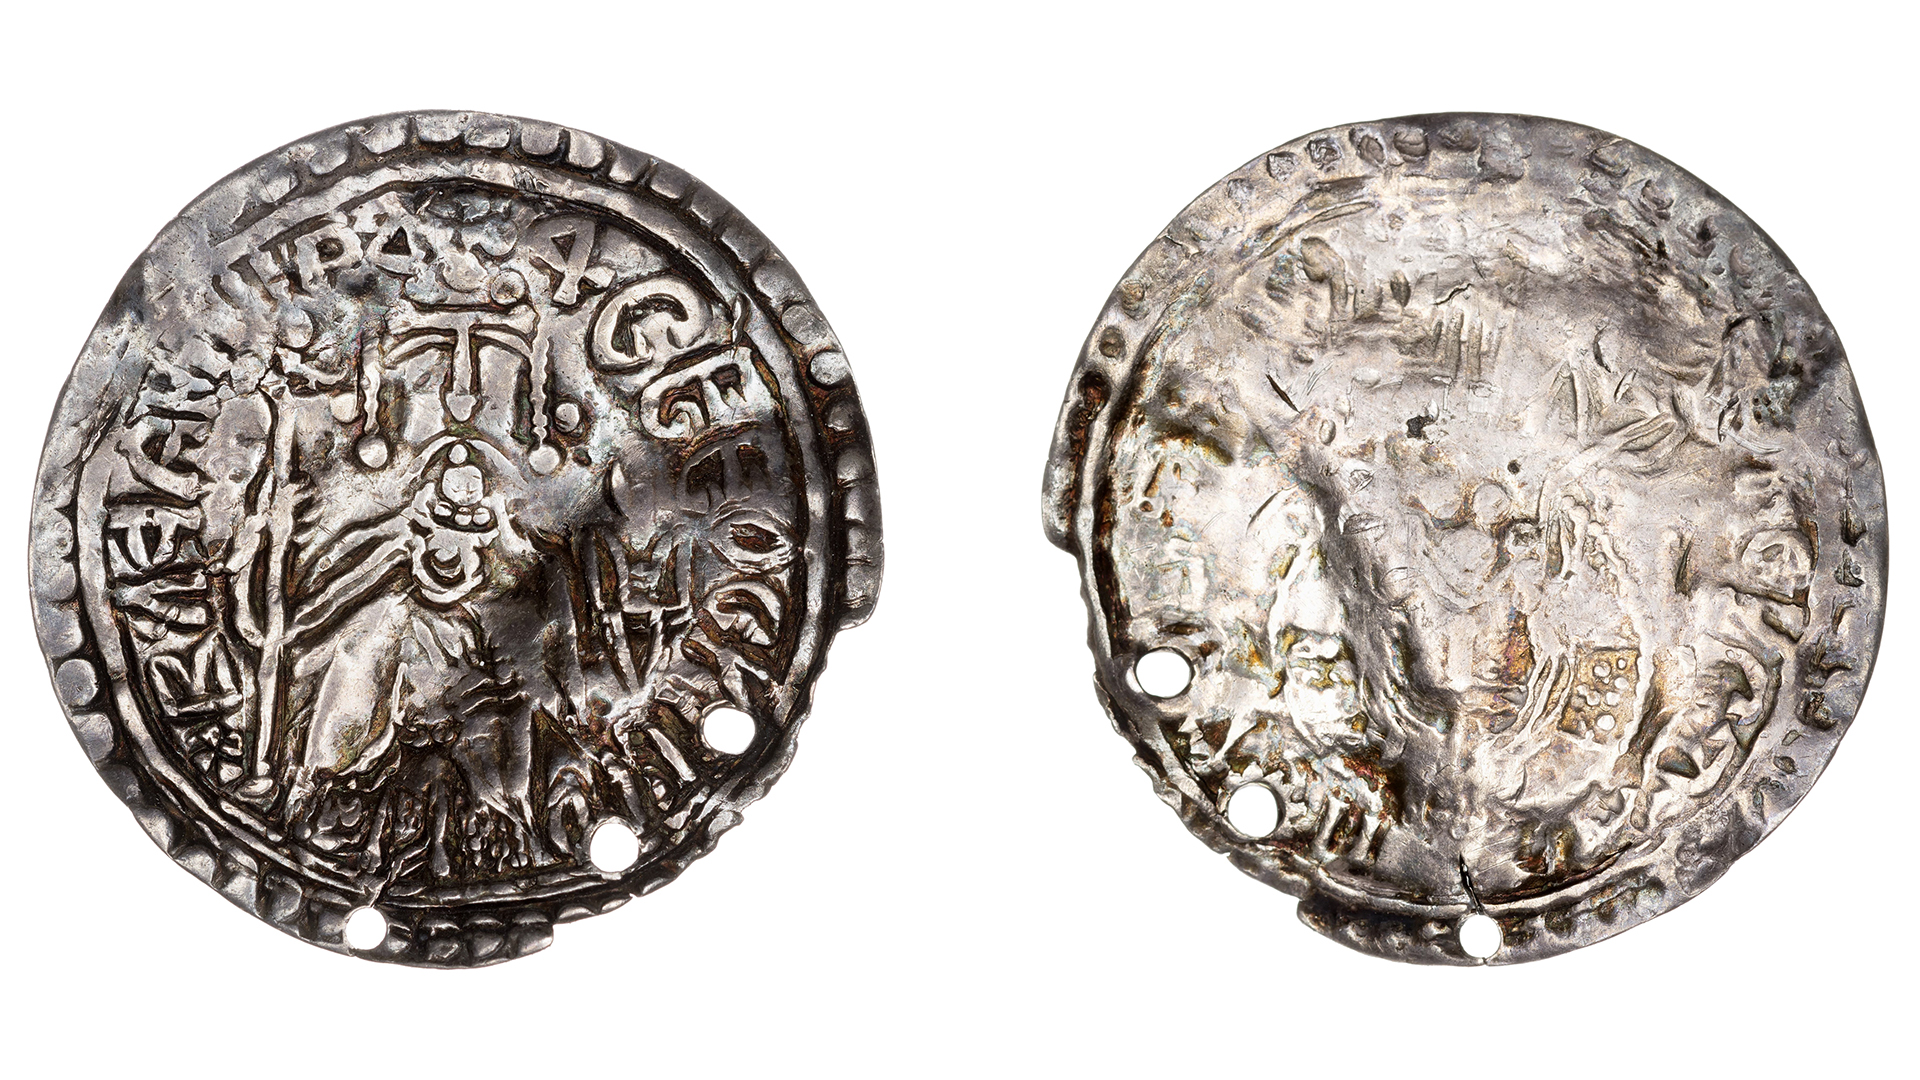 Silver coin, front and back. There are holes on the outside of the coin.